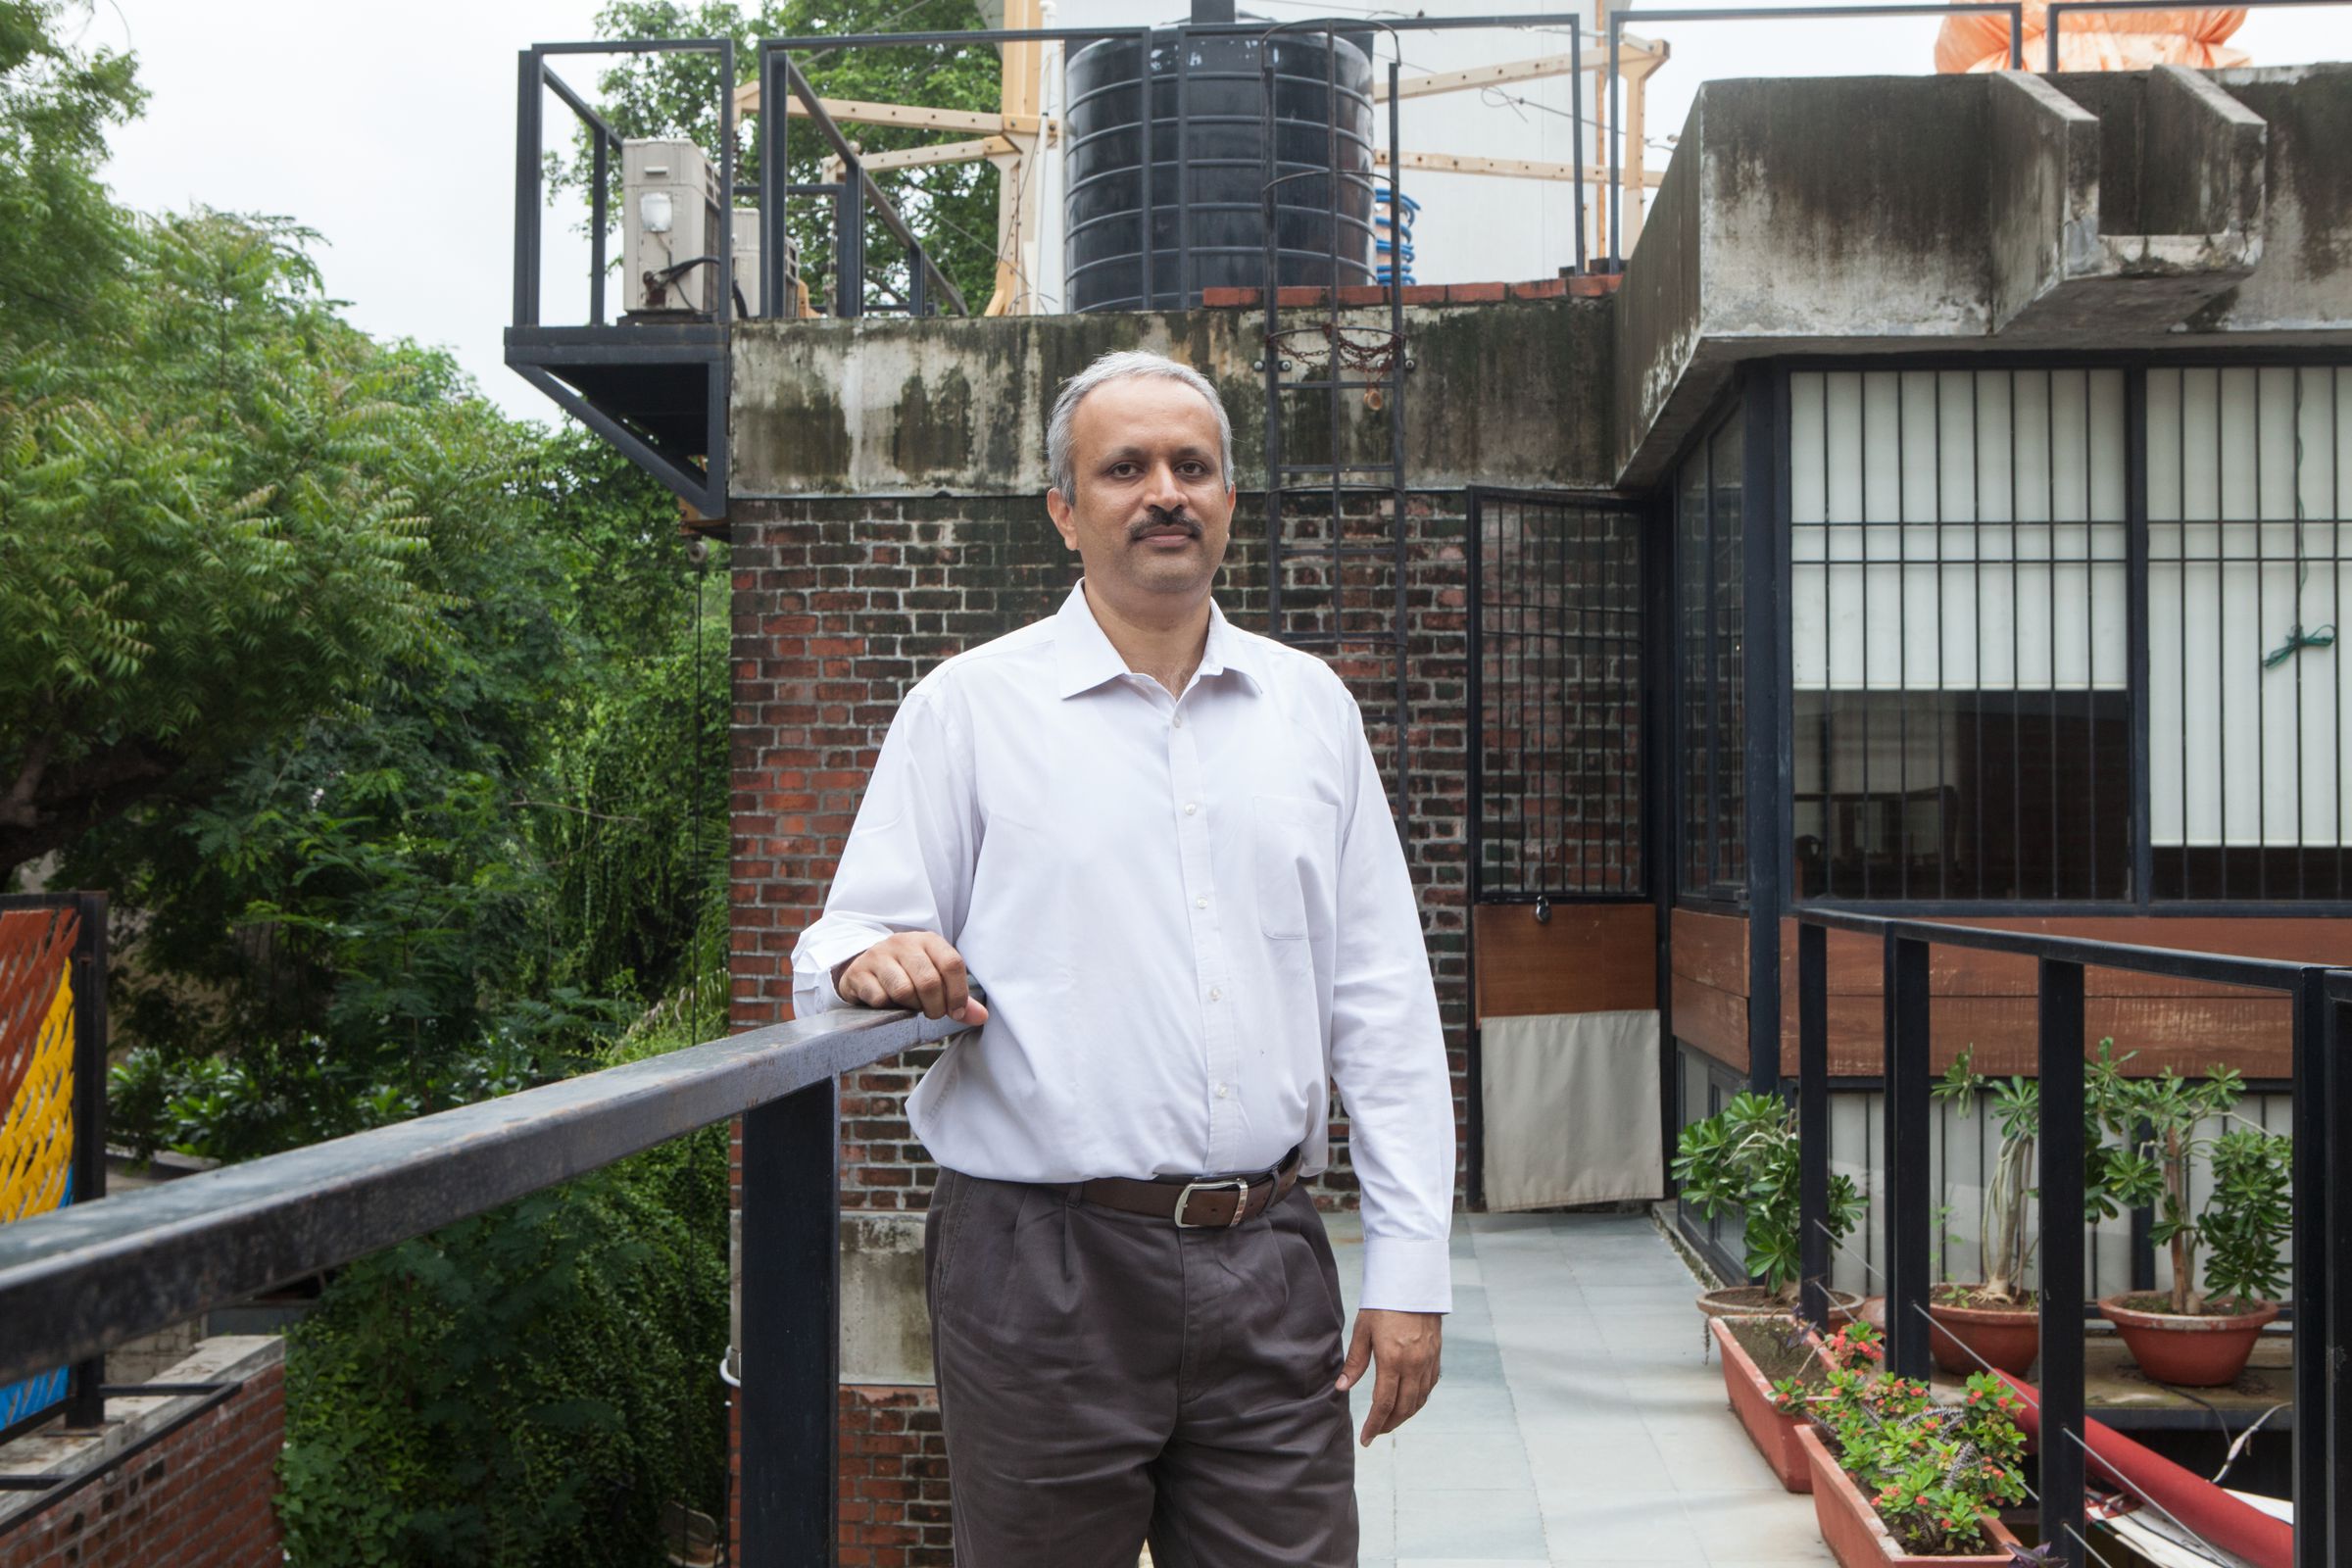 Professor Rajan Rawal, executive director at CEPT University’s Centre for Advanced Research in Building Science and Energy.